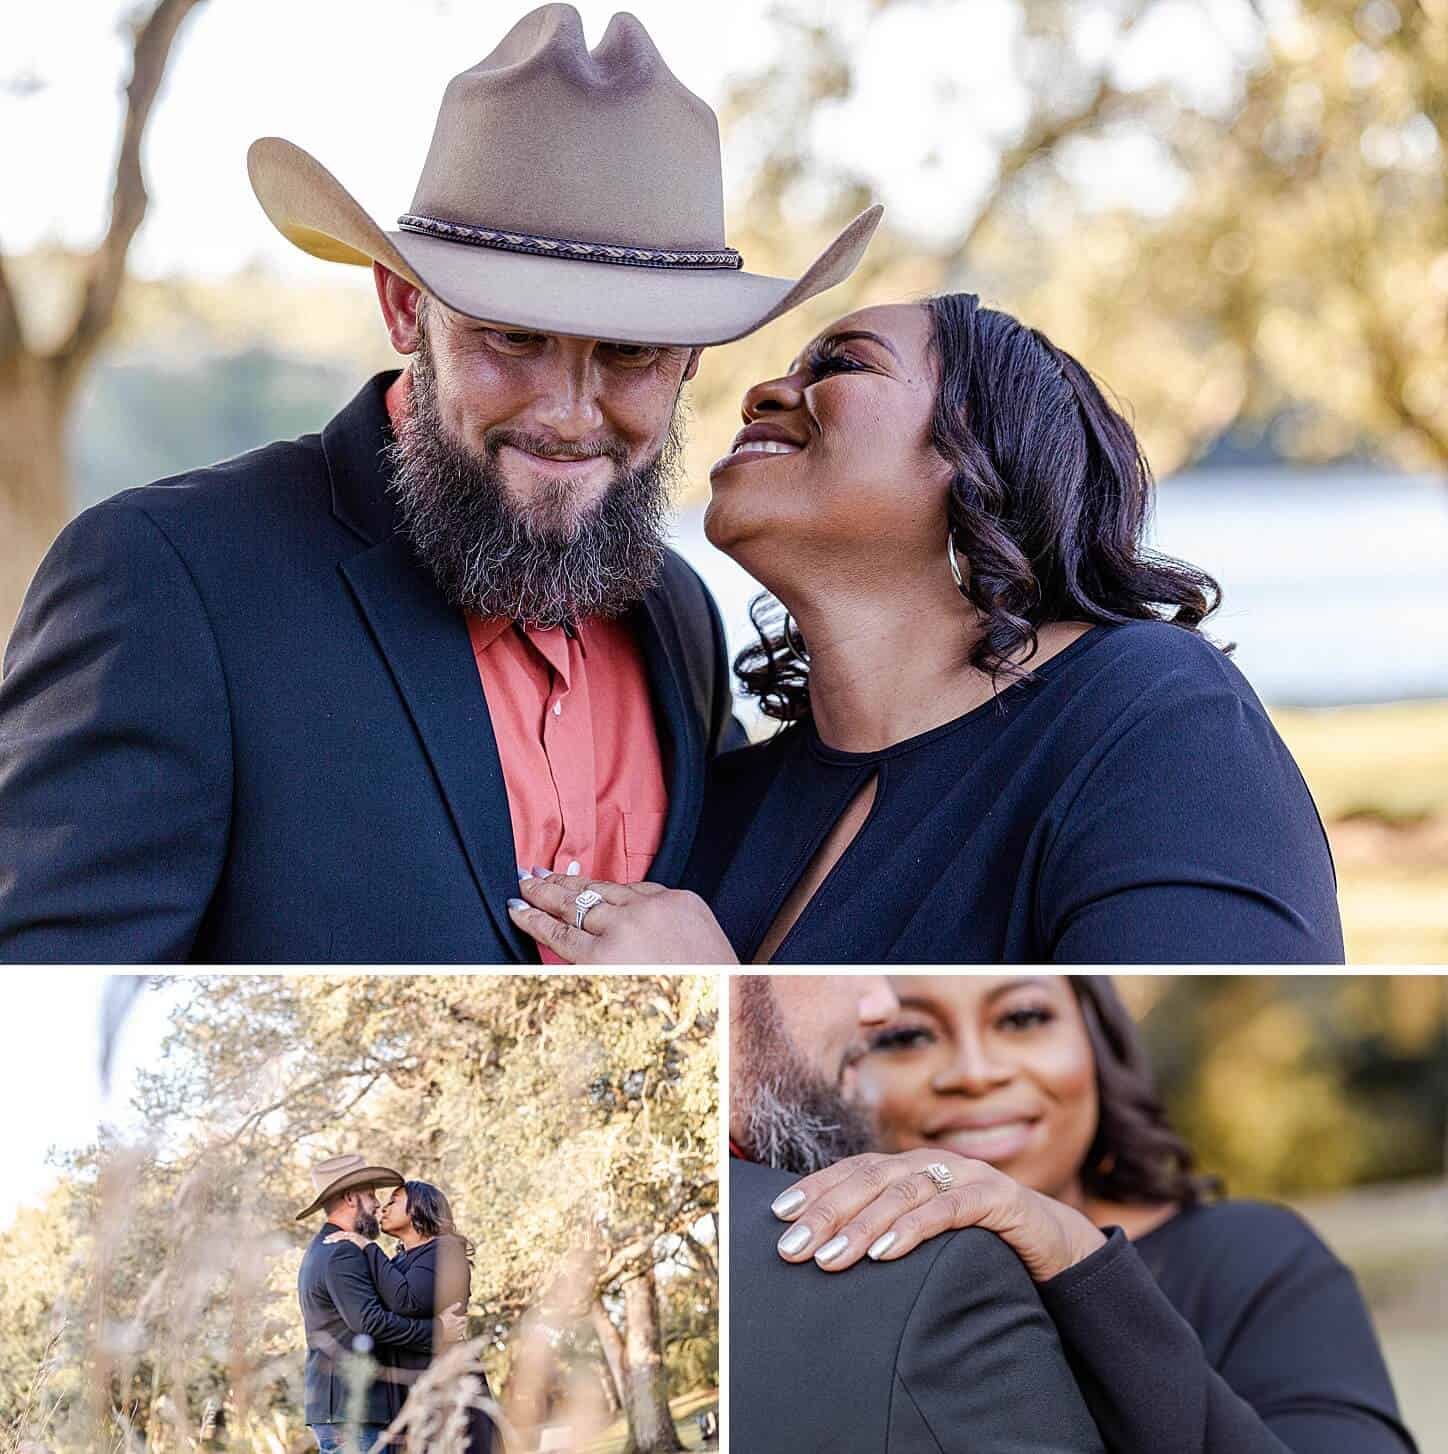 Couple at Tree Tops Park Davie, FL | Outfits for Engagement Pictures